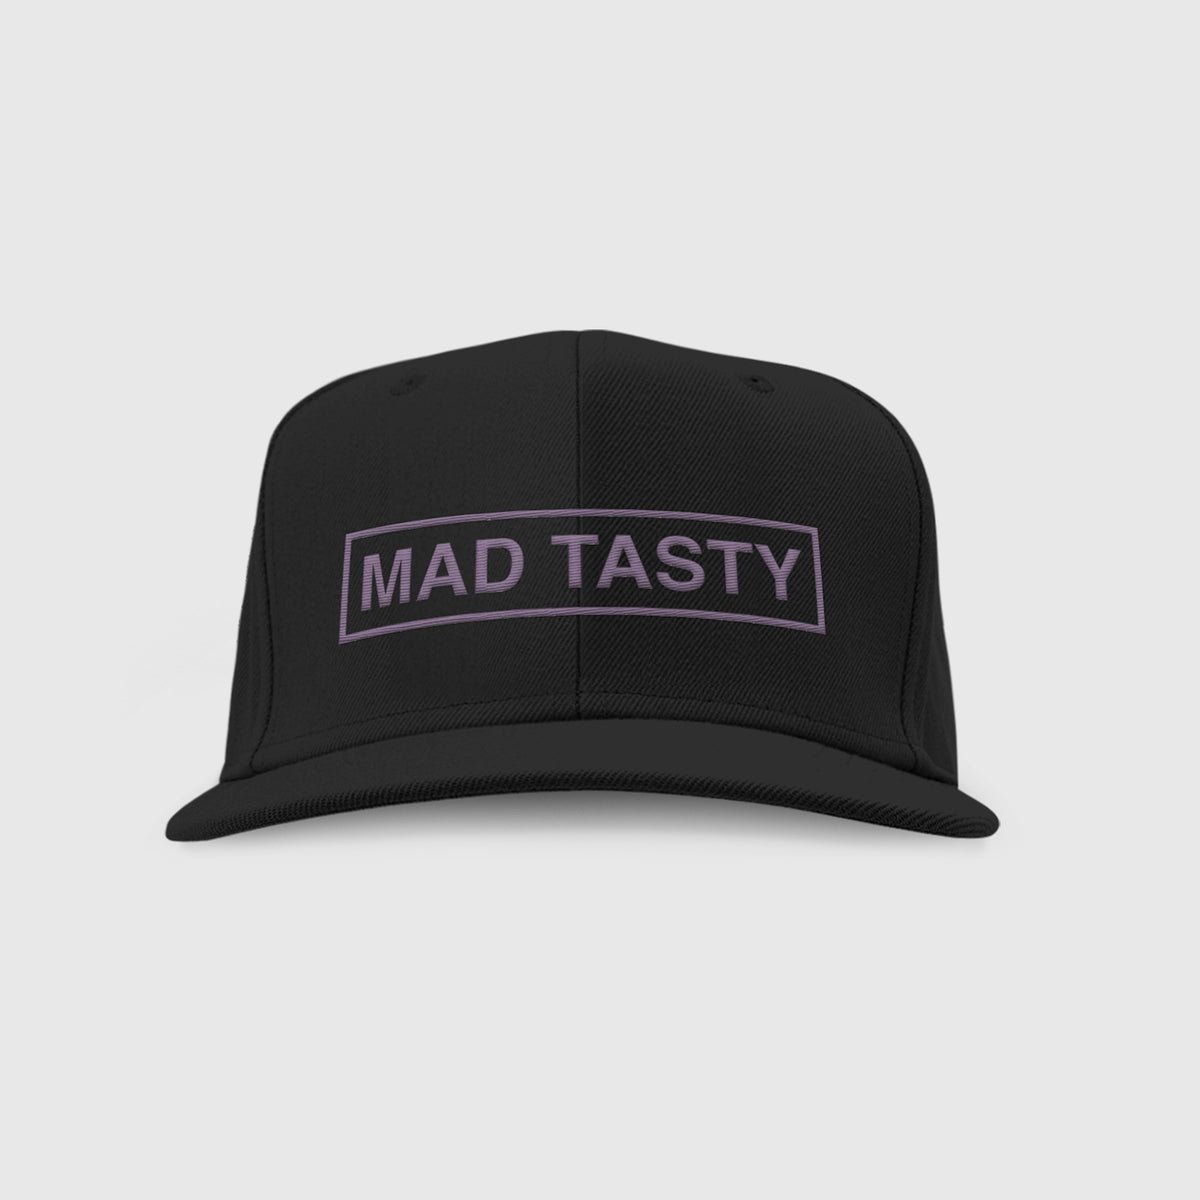 Baseball hat with MAD TASTY logo embroidered on front in grey.